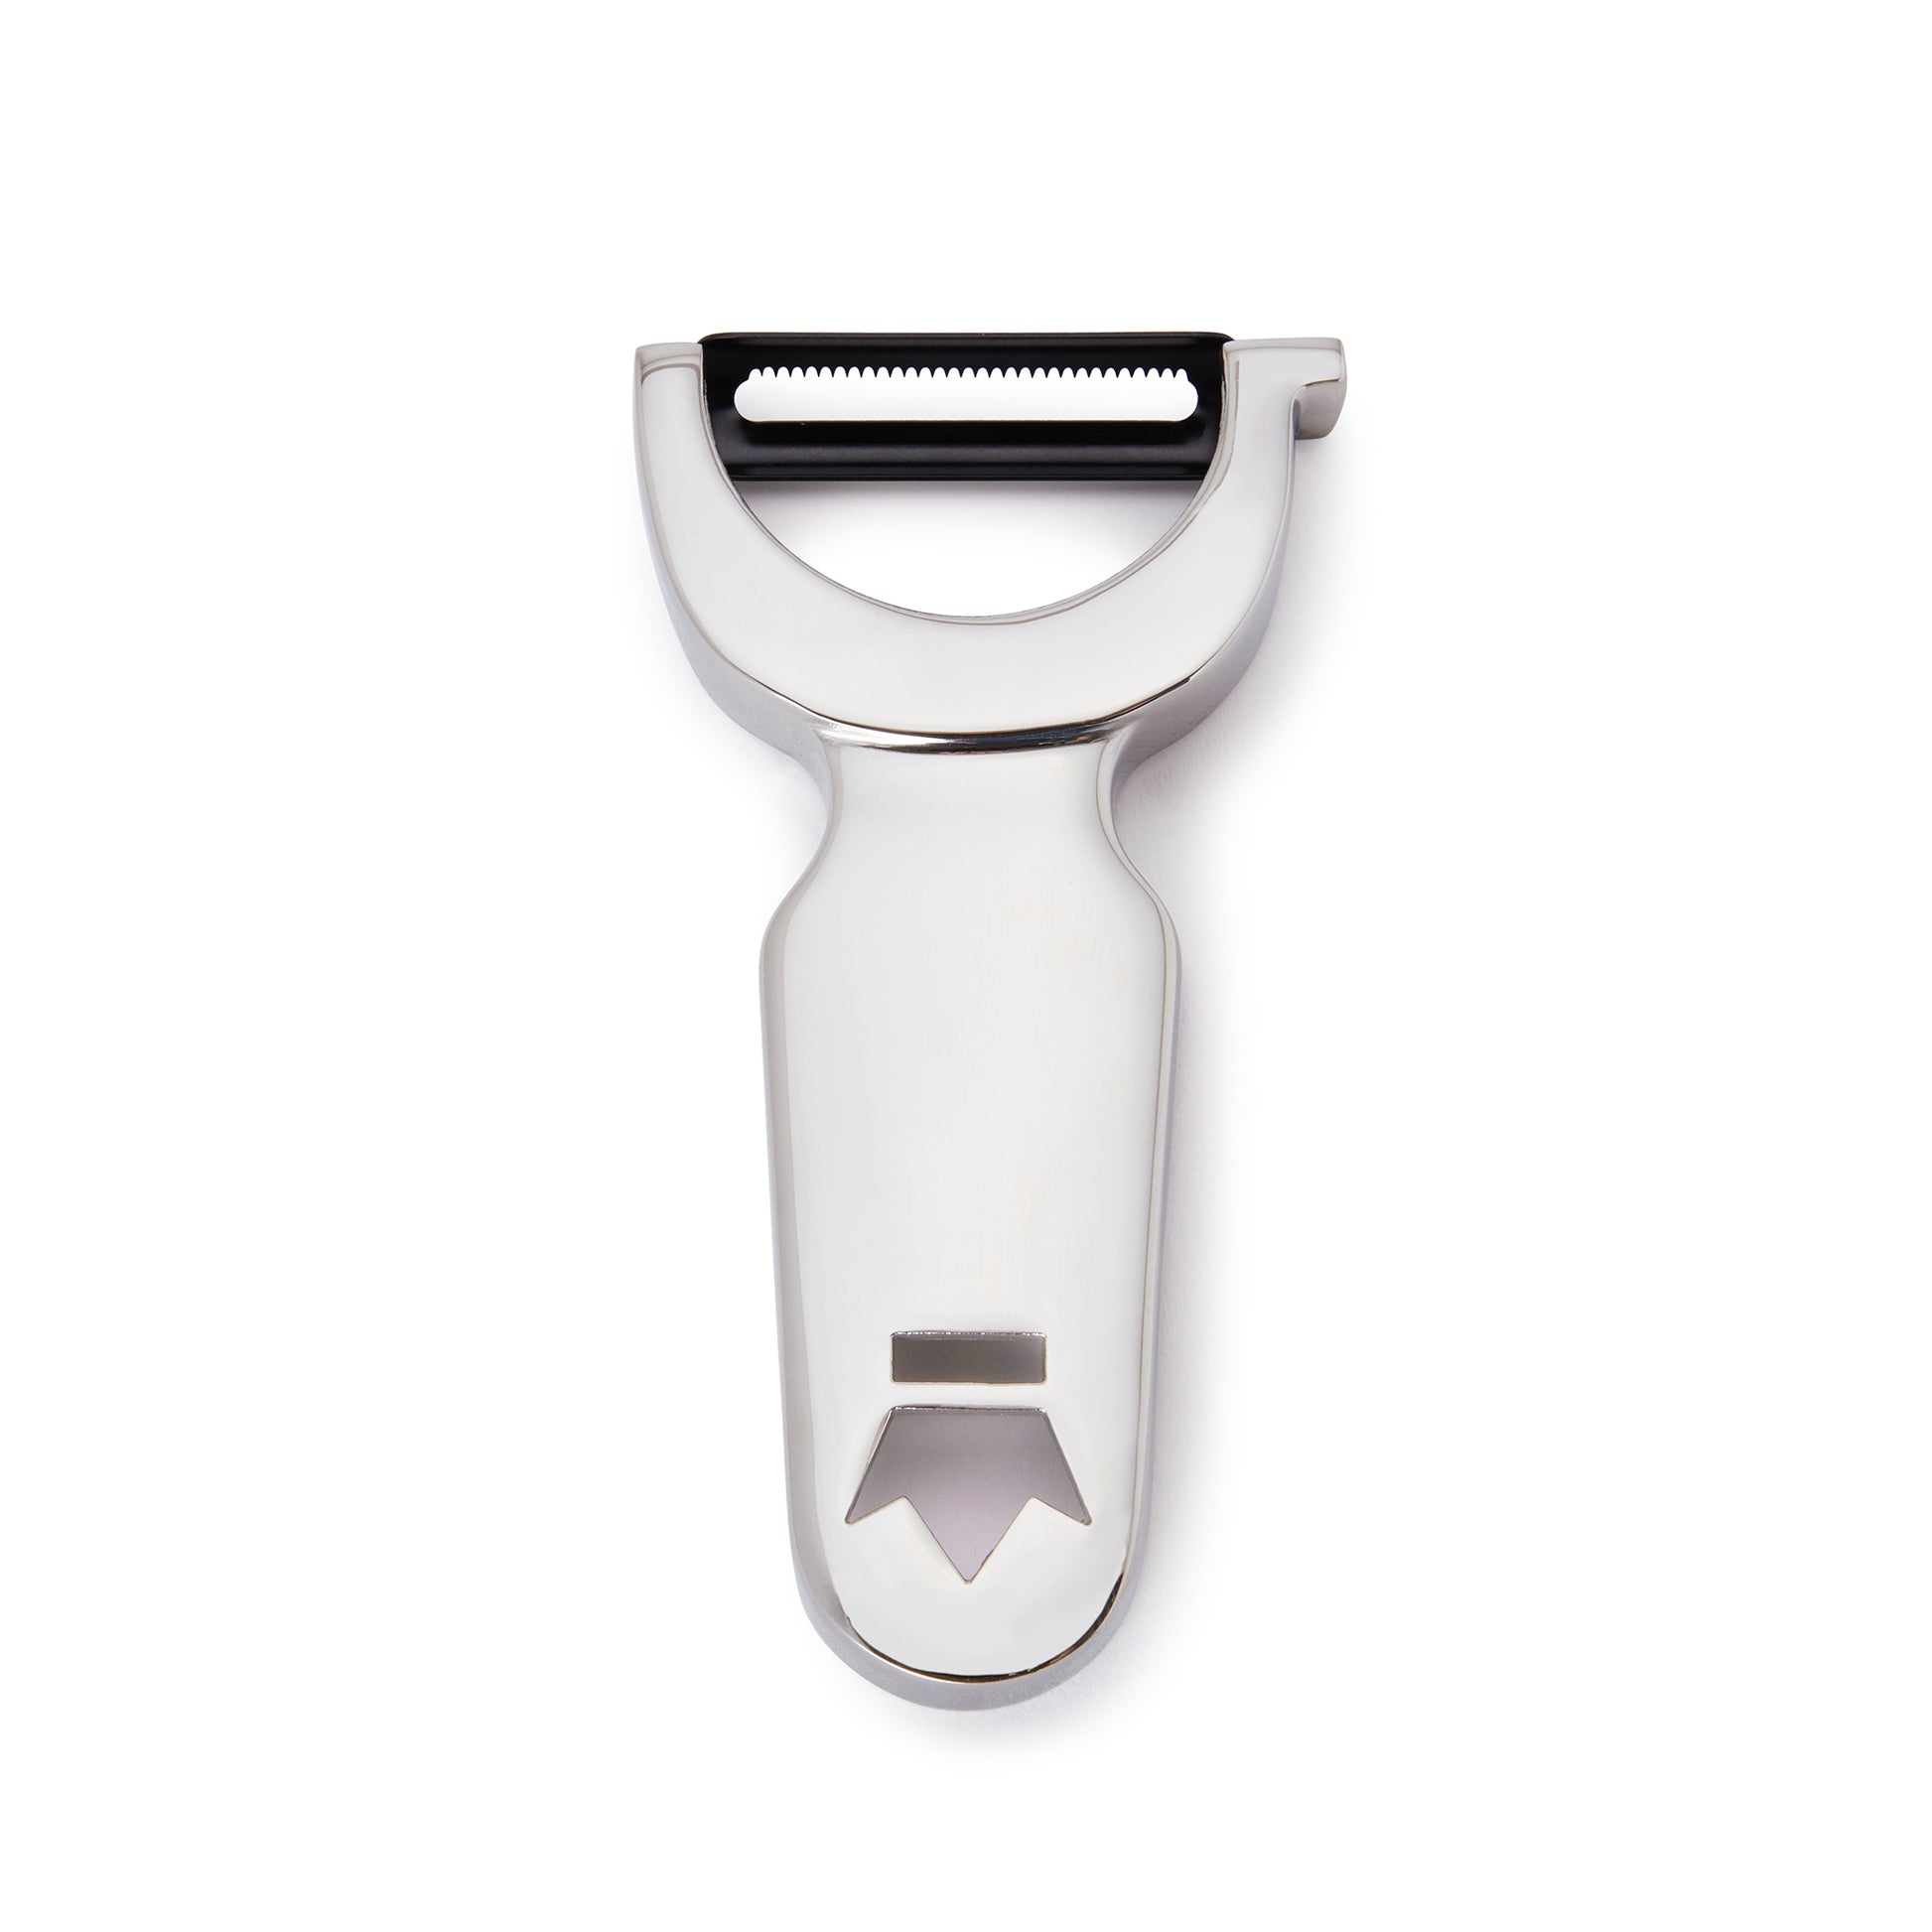 BUSWELL CAST METAL PEELER – SERRATED / STAINLESS STEEL